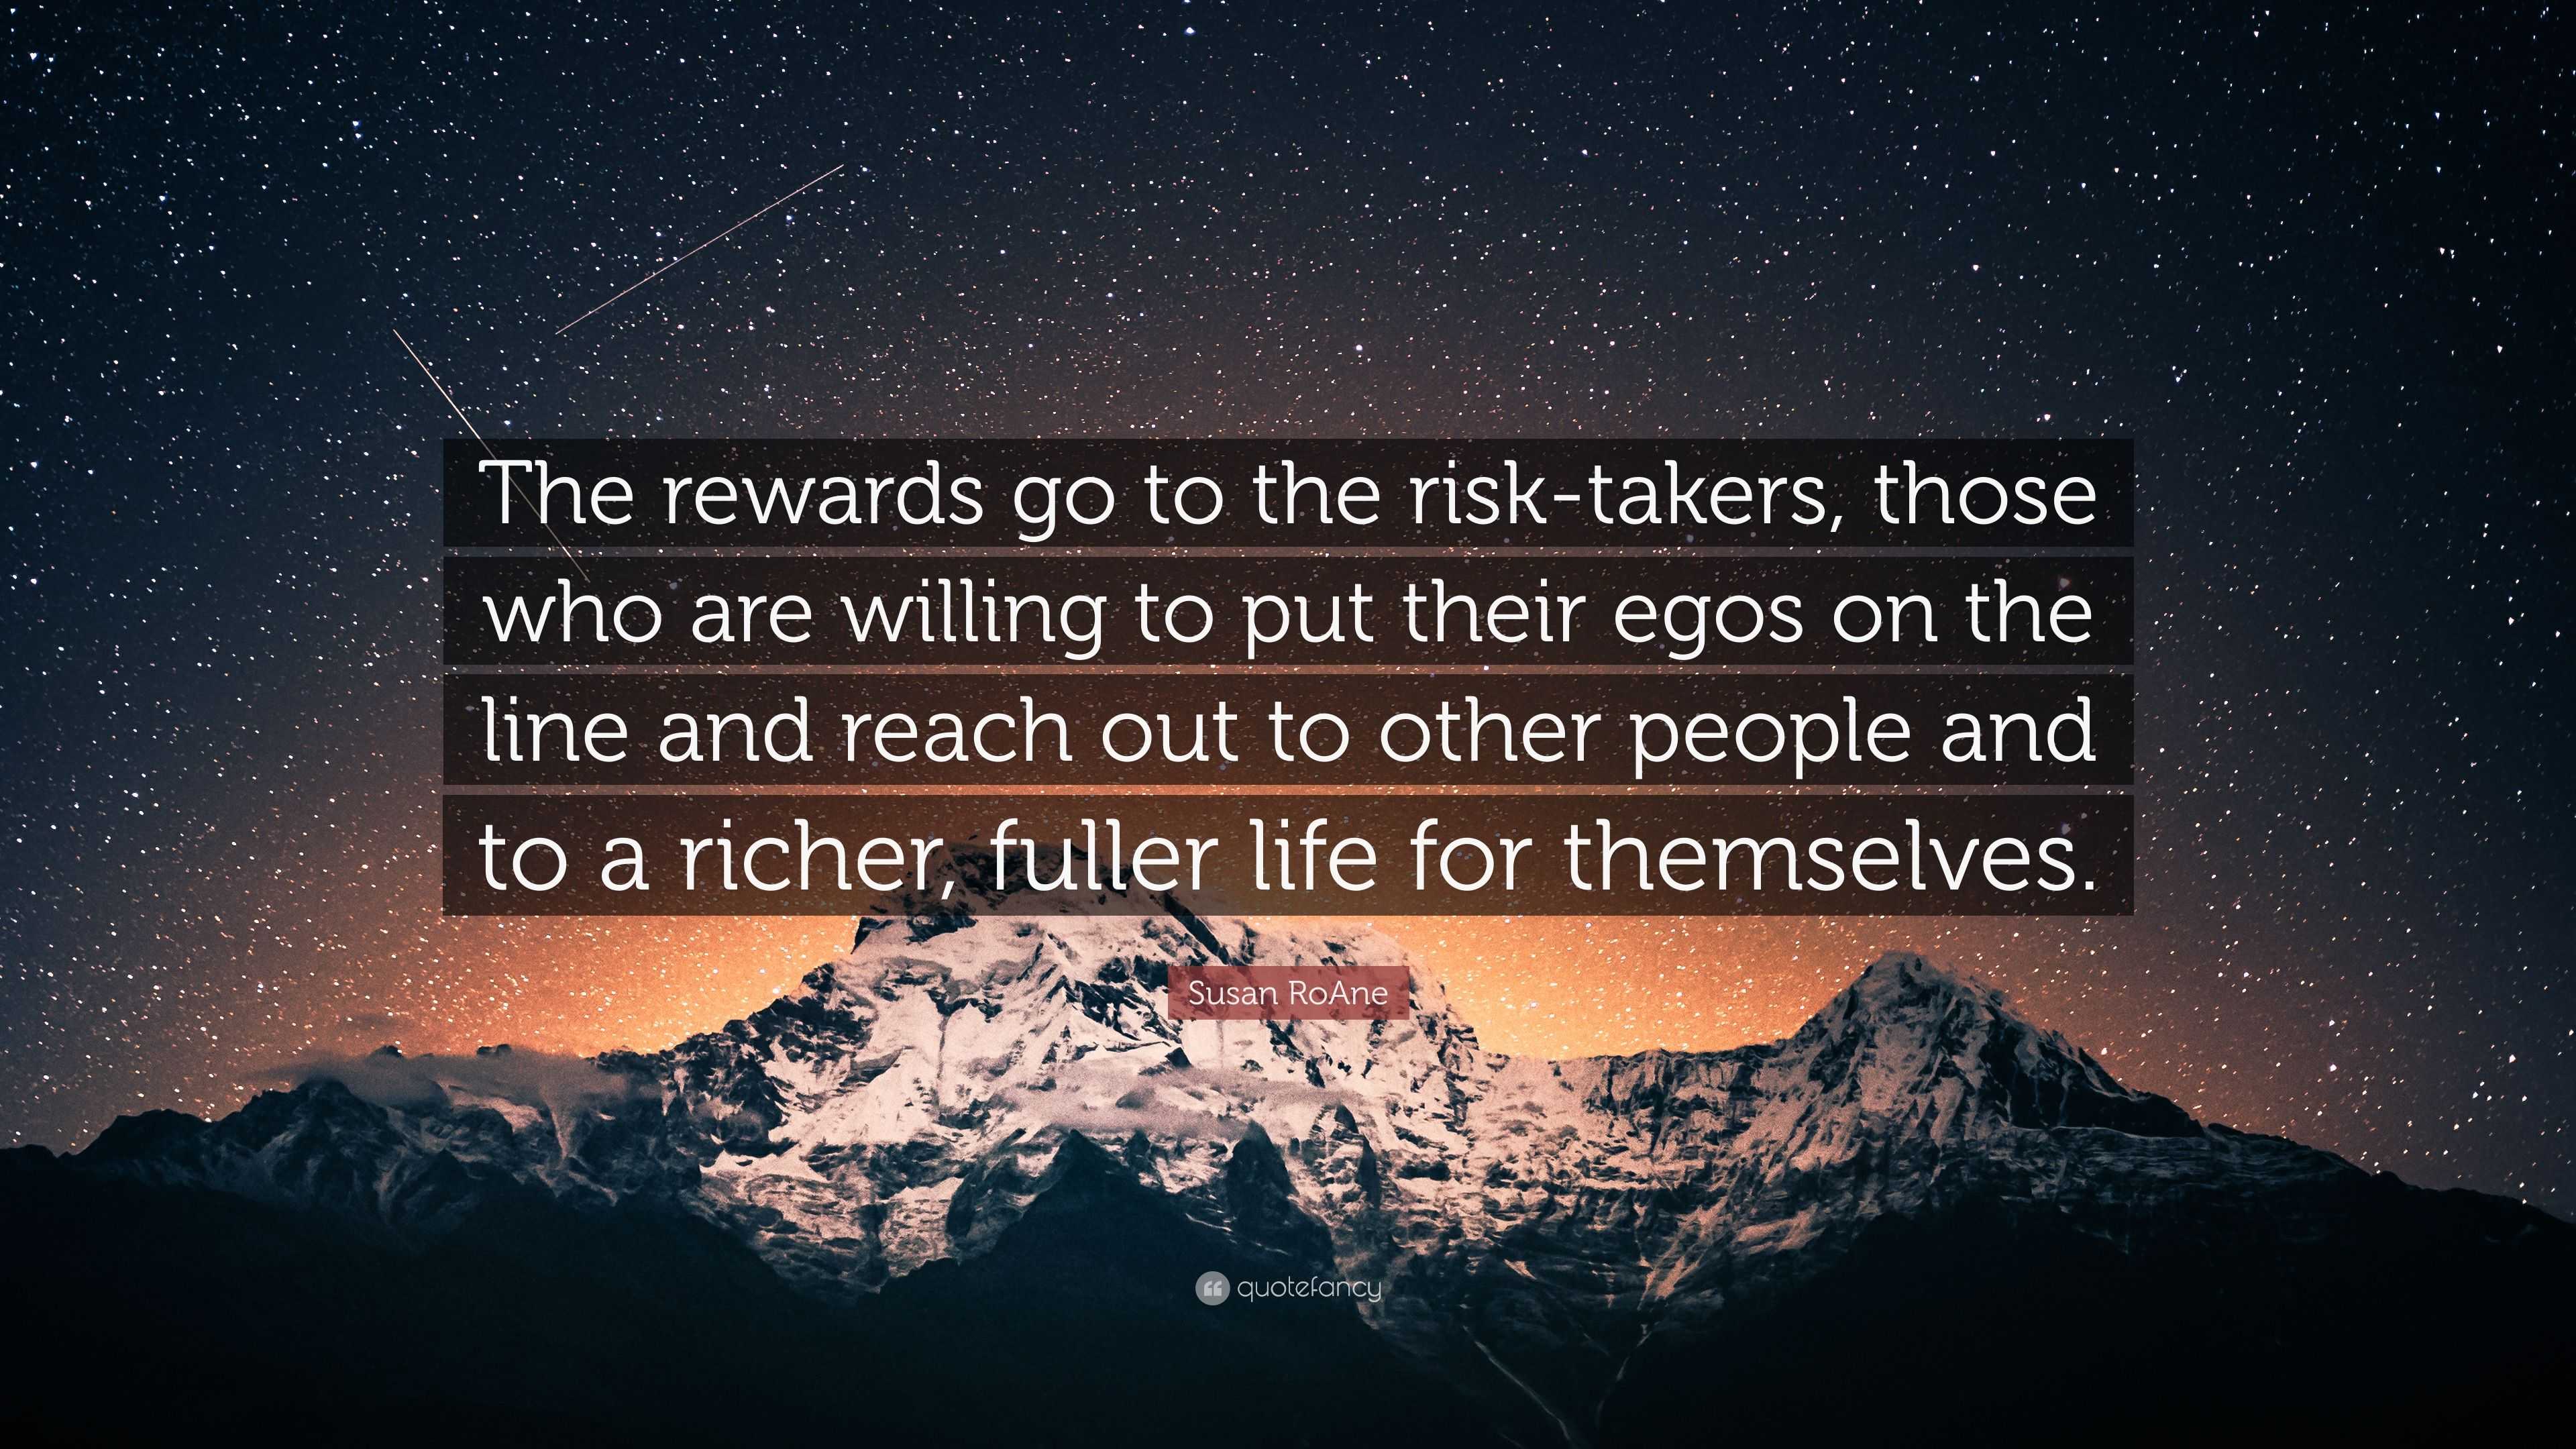 4643340-Susan-RoAne-Quote-The-rewards-go-to-the-risk-takers-those-who-are.jpg